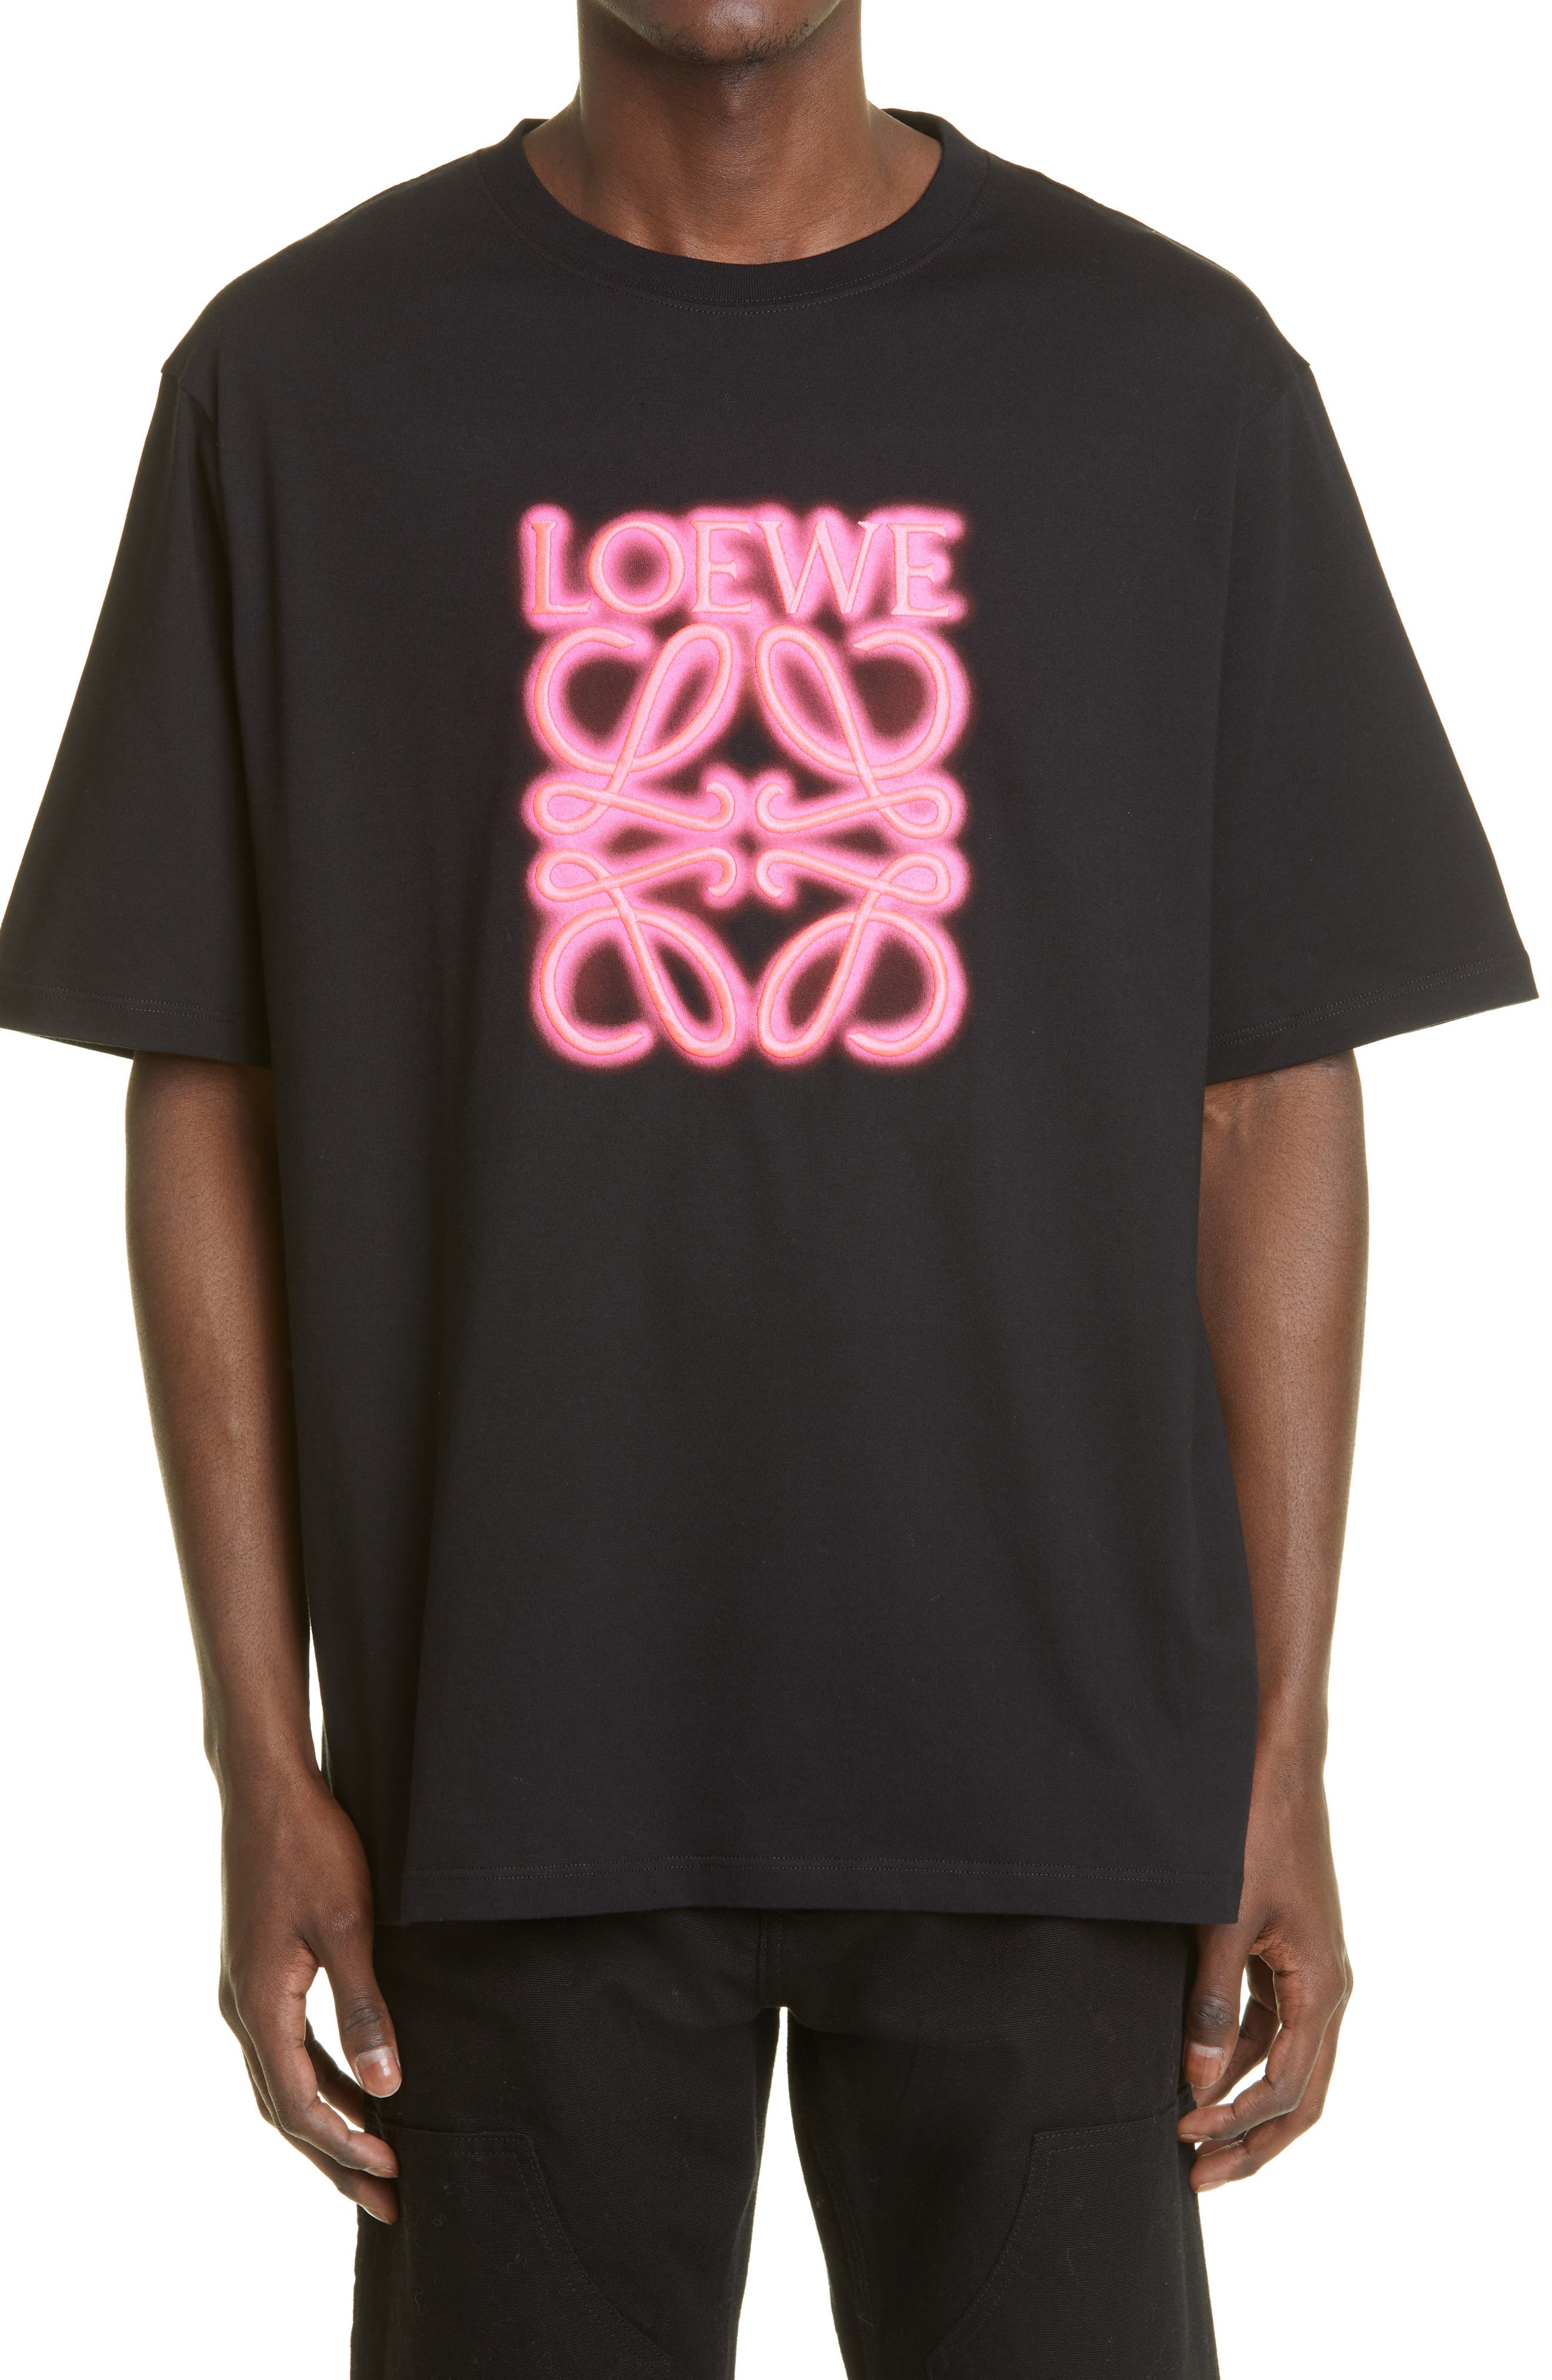 Loewe Men's Neon Anagram Logo Embroidered Cotton T-Shirt in Black/Fluorescent Pink at Nordstrom, Size Large